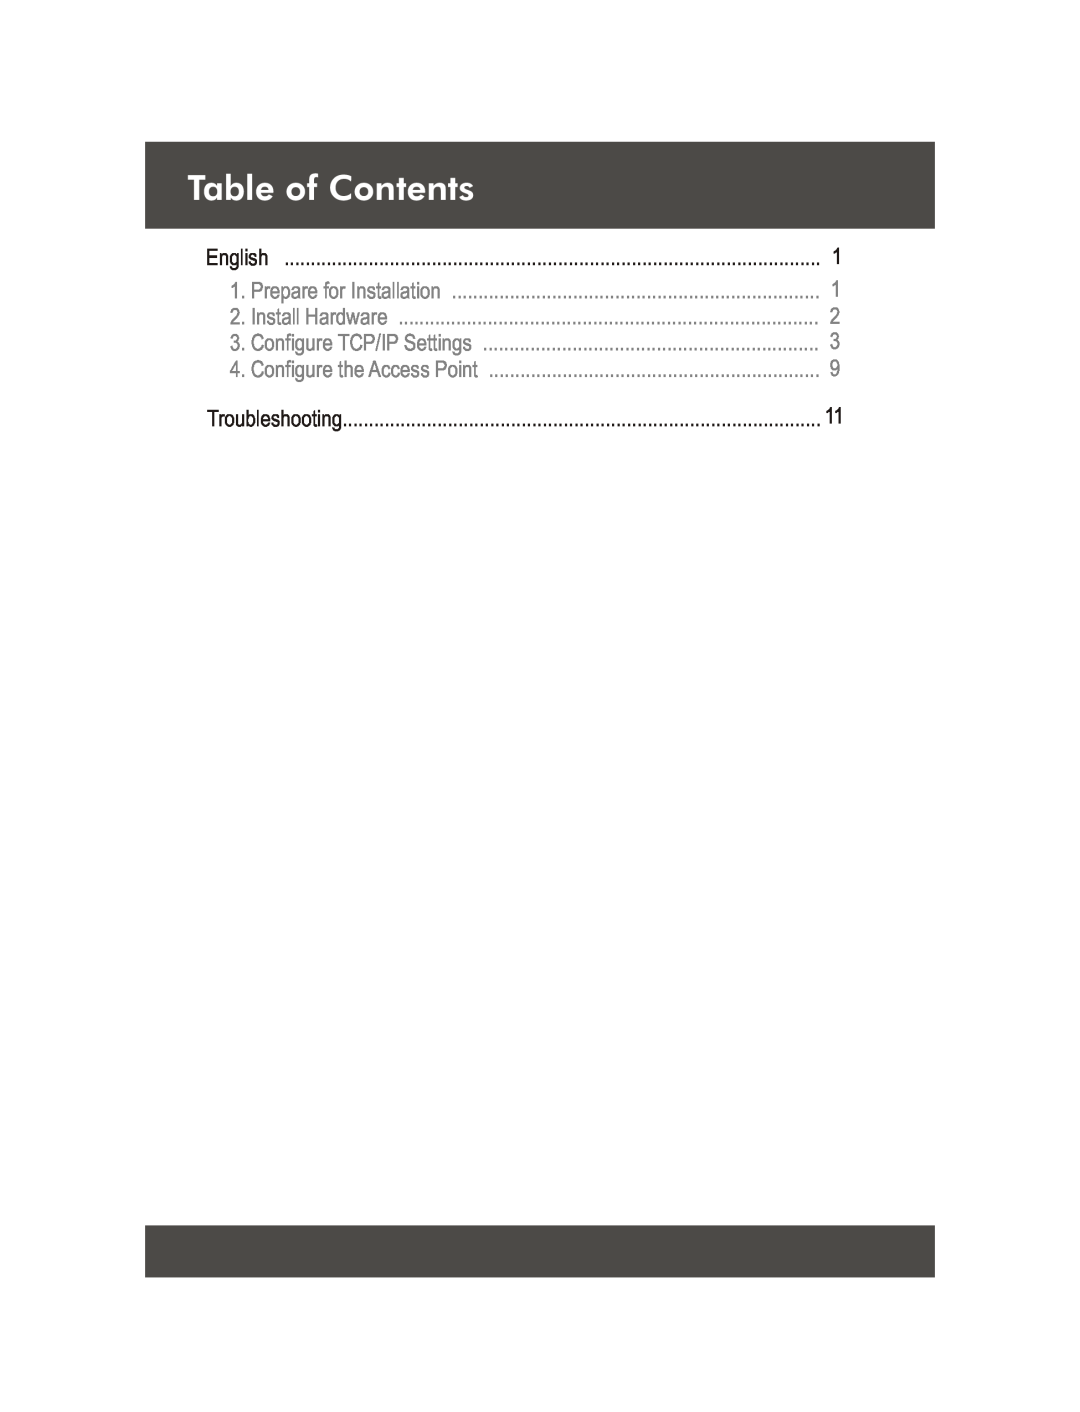 TRENDnet TEW-453APB manual Table of Contents, Prepare for Installation, Install Hardware, Configure TCP/IP Settings 